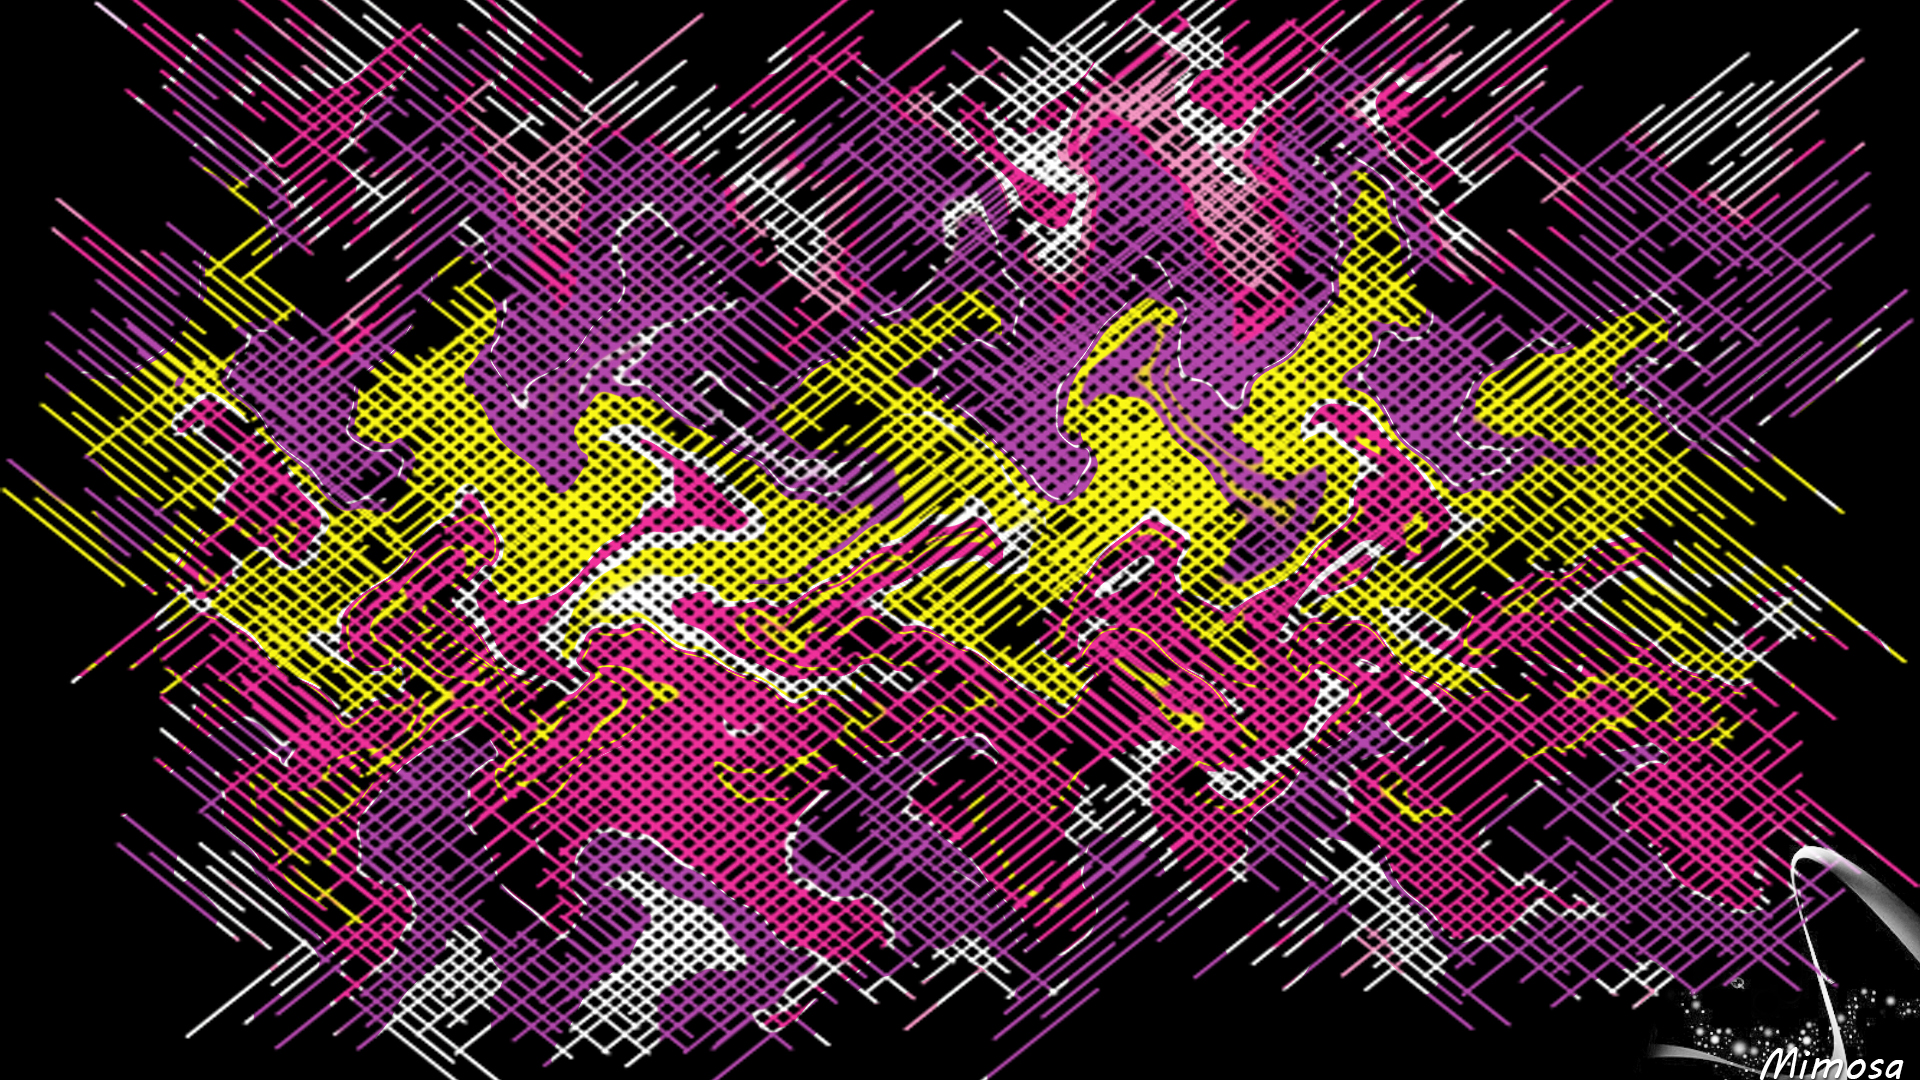 Abstract Artistic Colorful Digital Art Lines 1920x1080